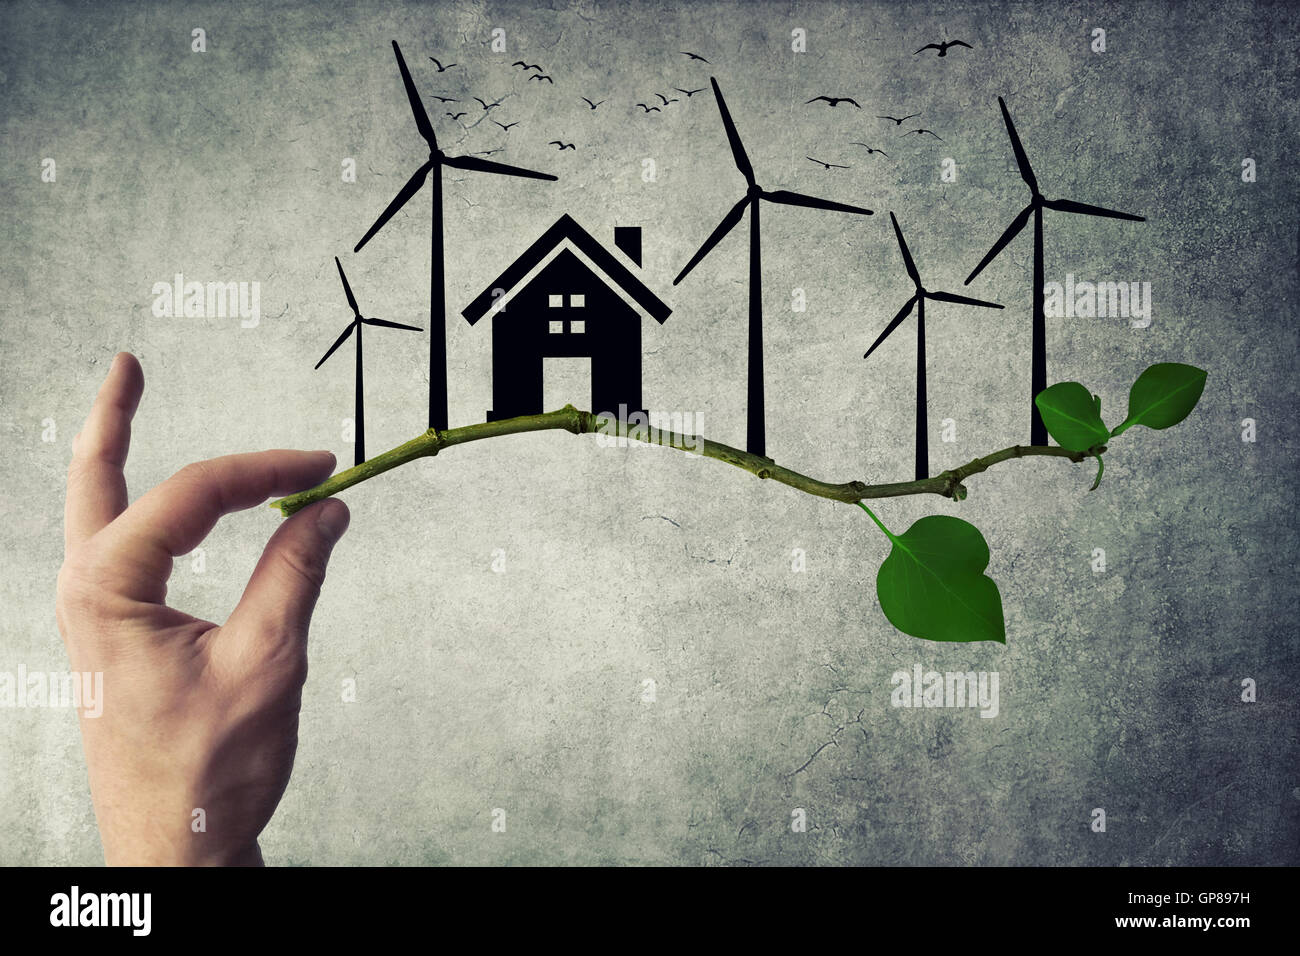 Human hand holding a tree branch. Environmental green energy concept. Silhouette of house, wind turbine and birds flying Stock Photo